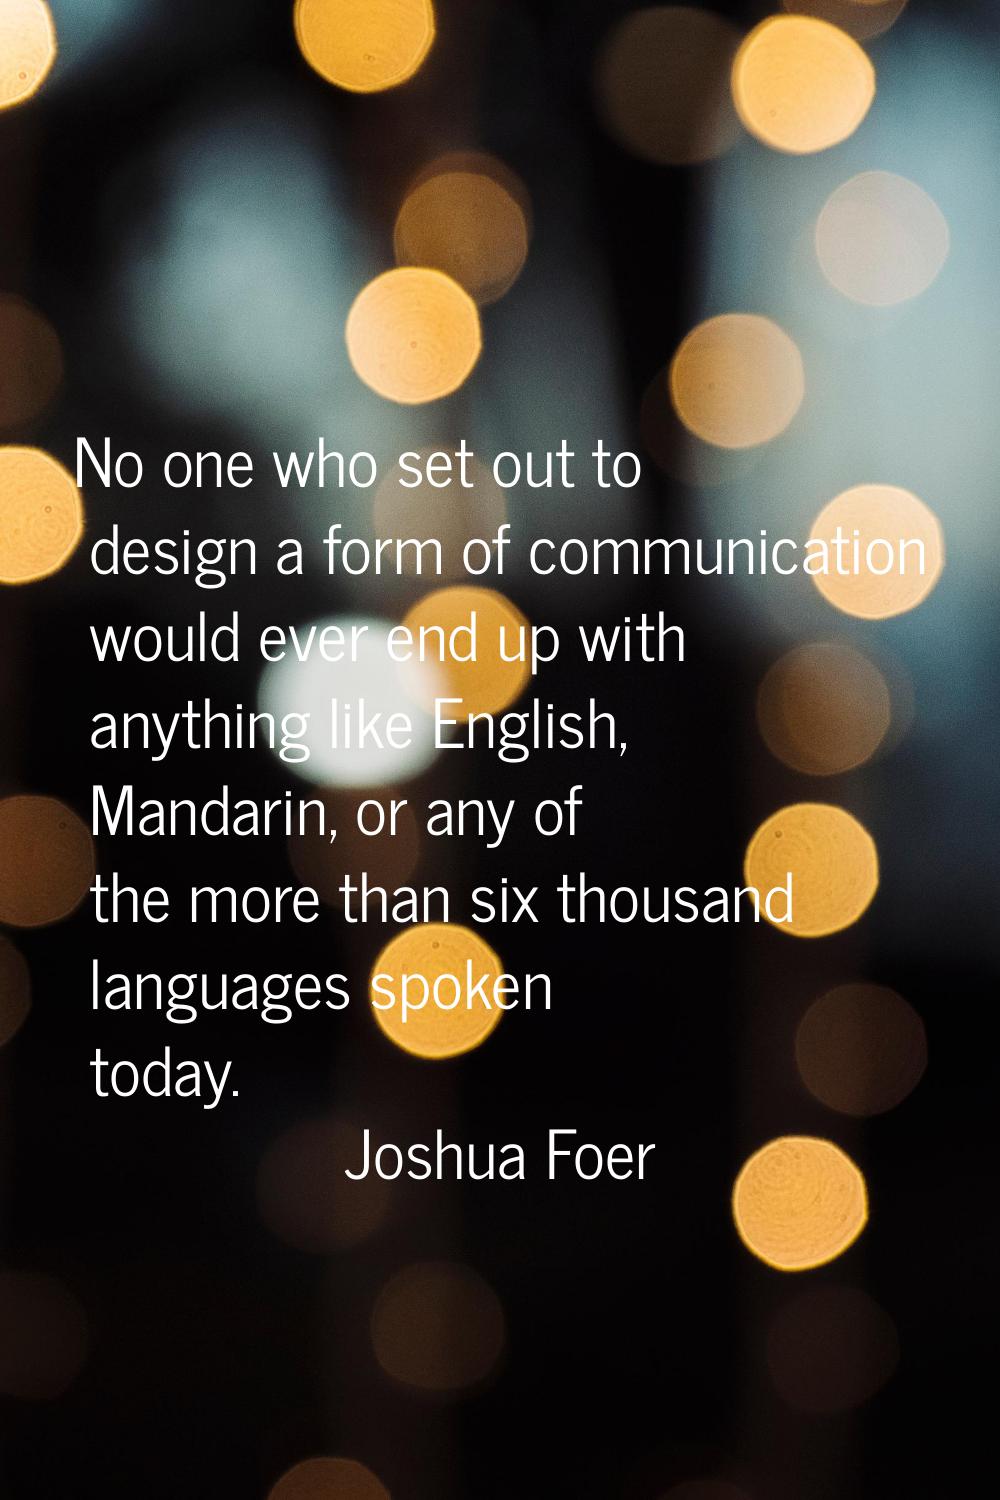 No one who set out to design a form of communication would ever end up with anything like English, 